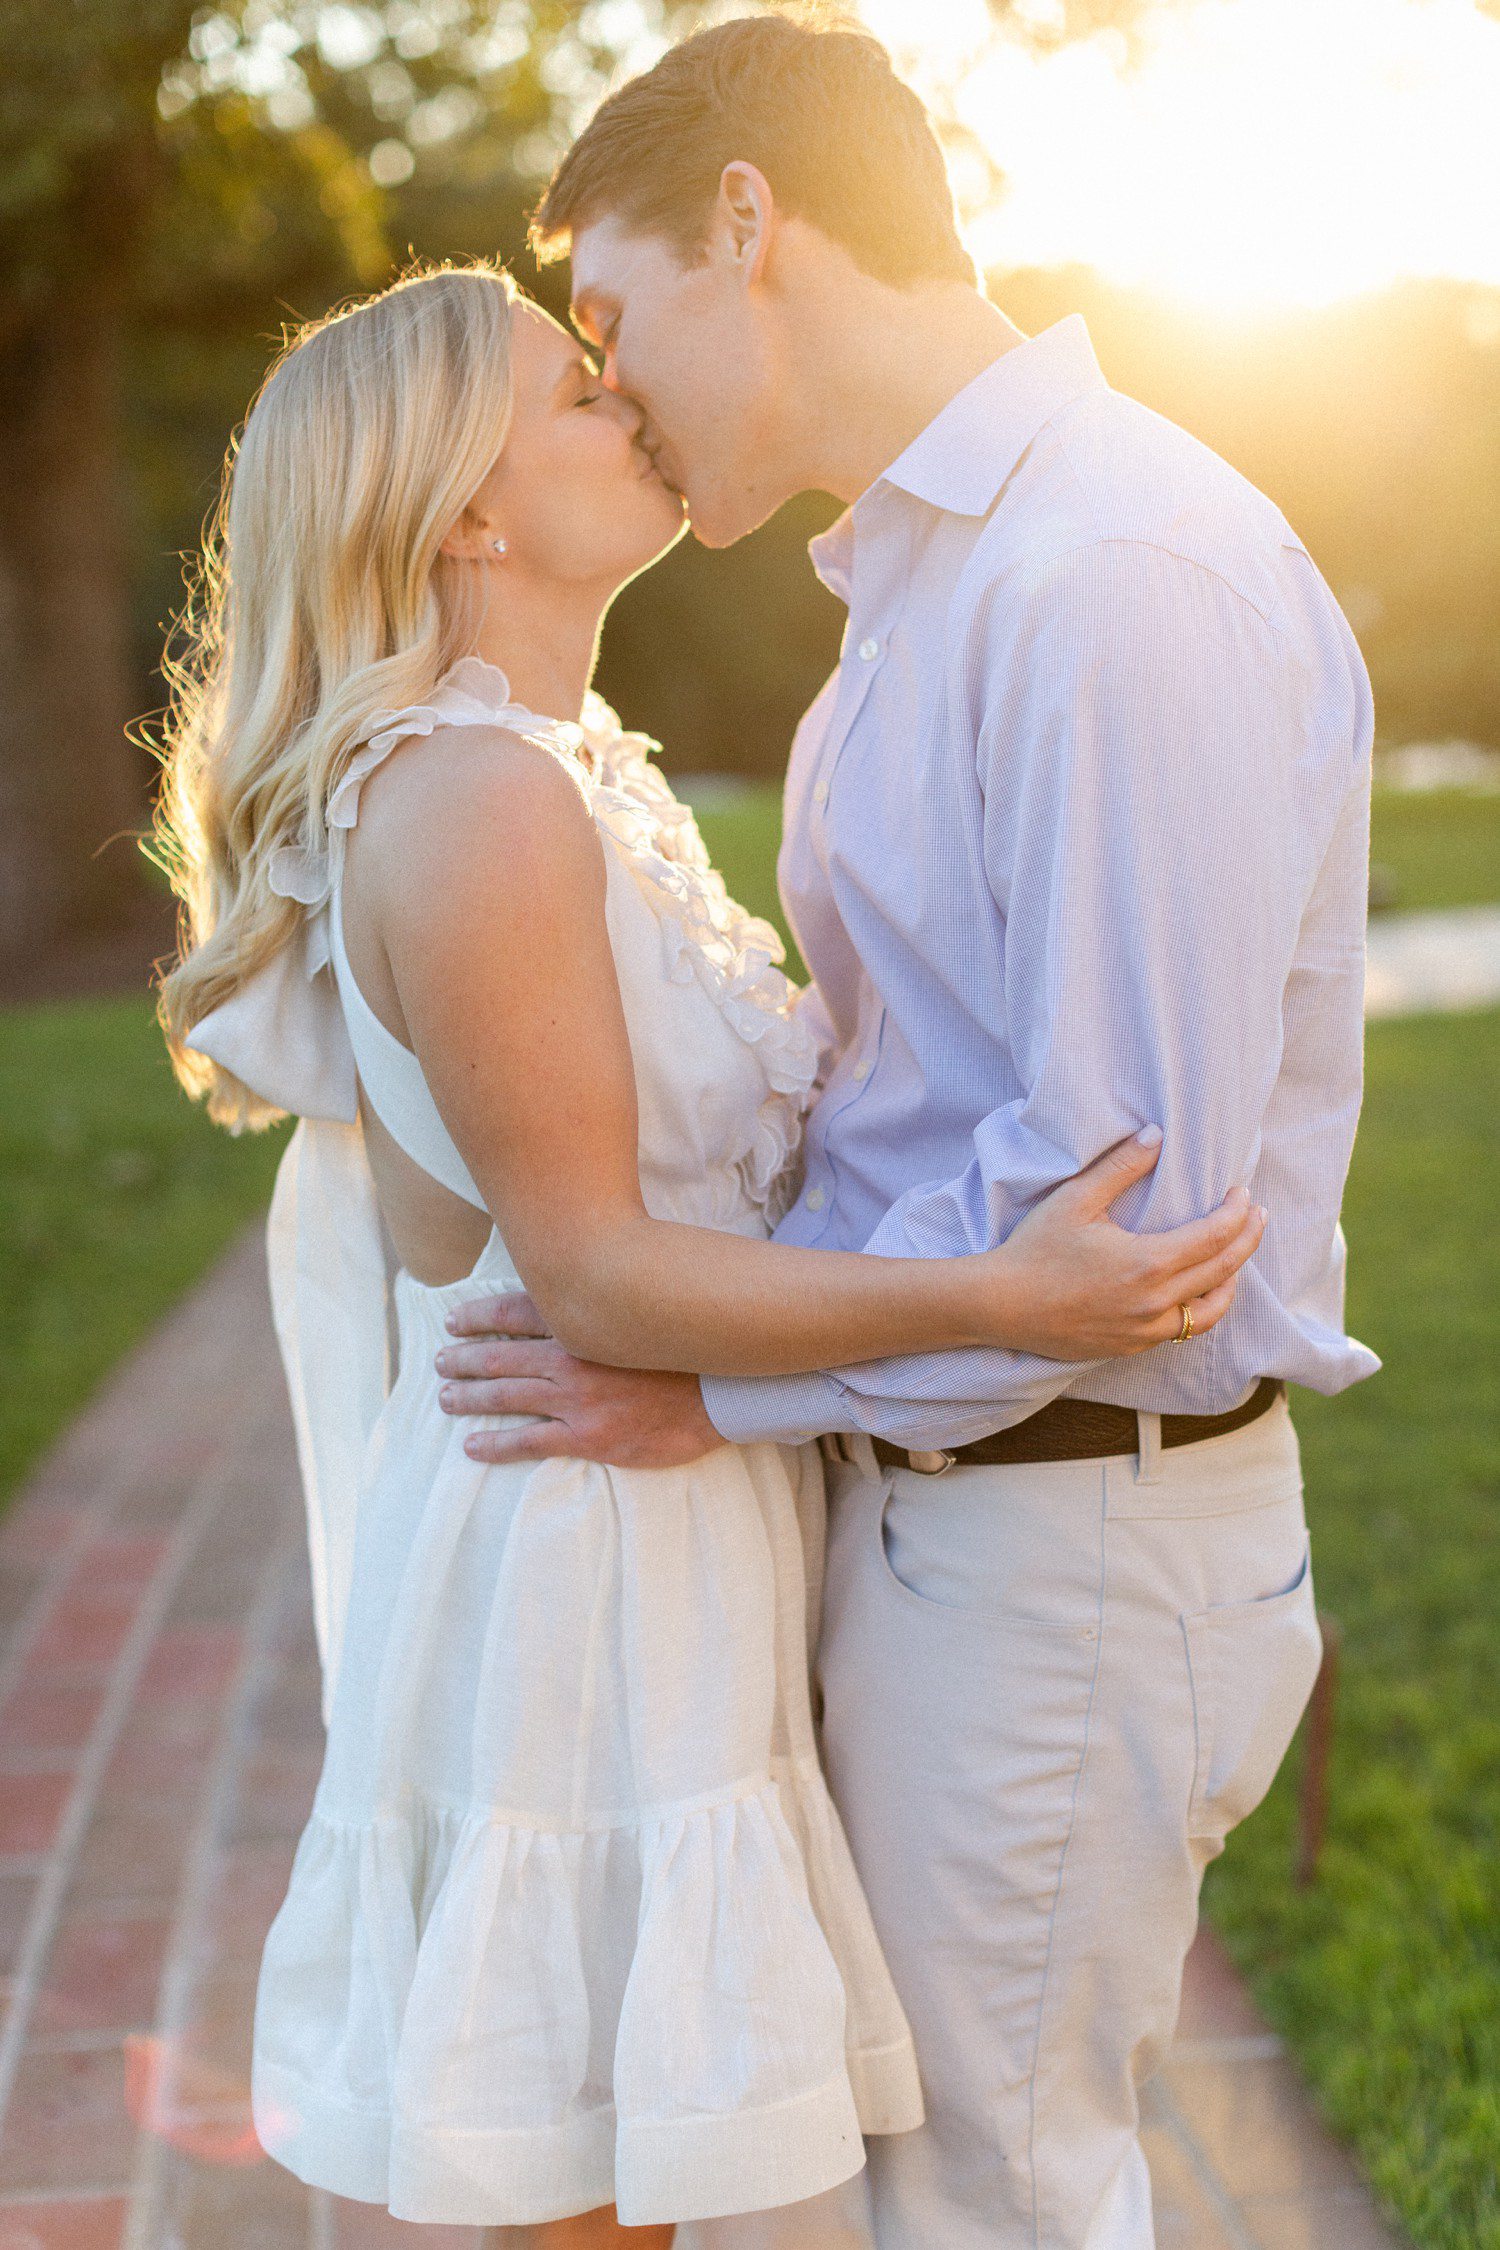 Austin Engagement Photos at Commodore Perry Estate